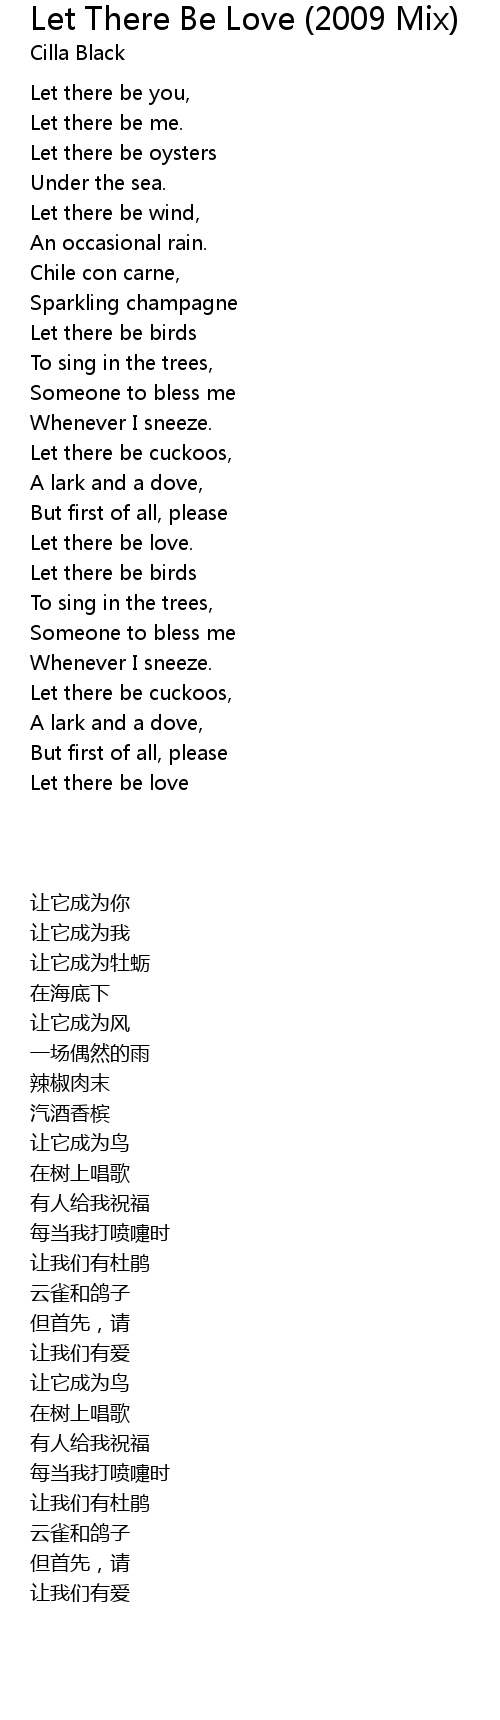 Let There Be Love (2009 Mix) 歌词